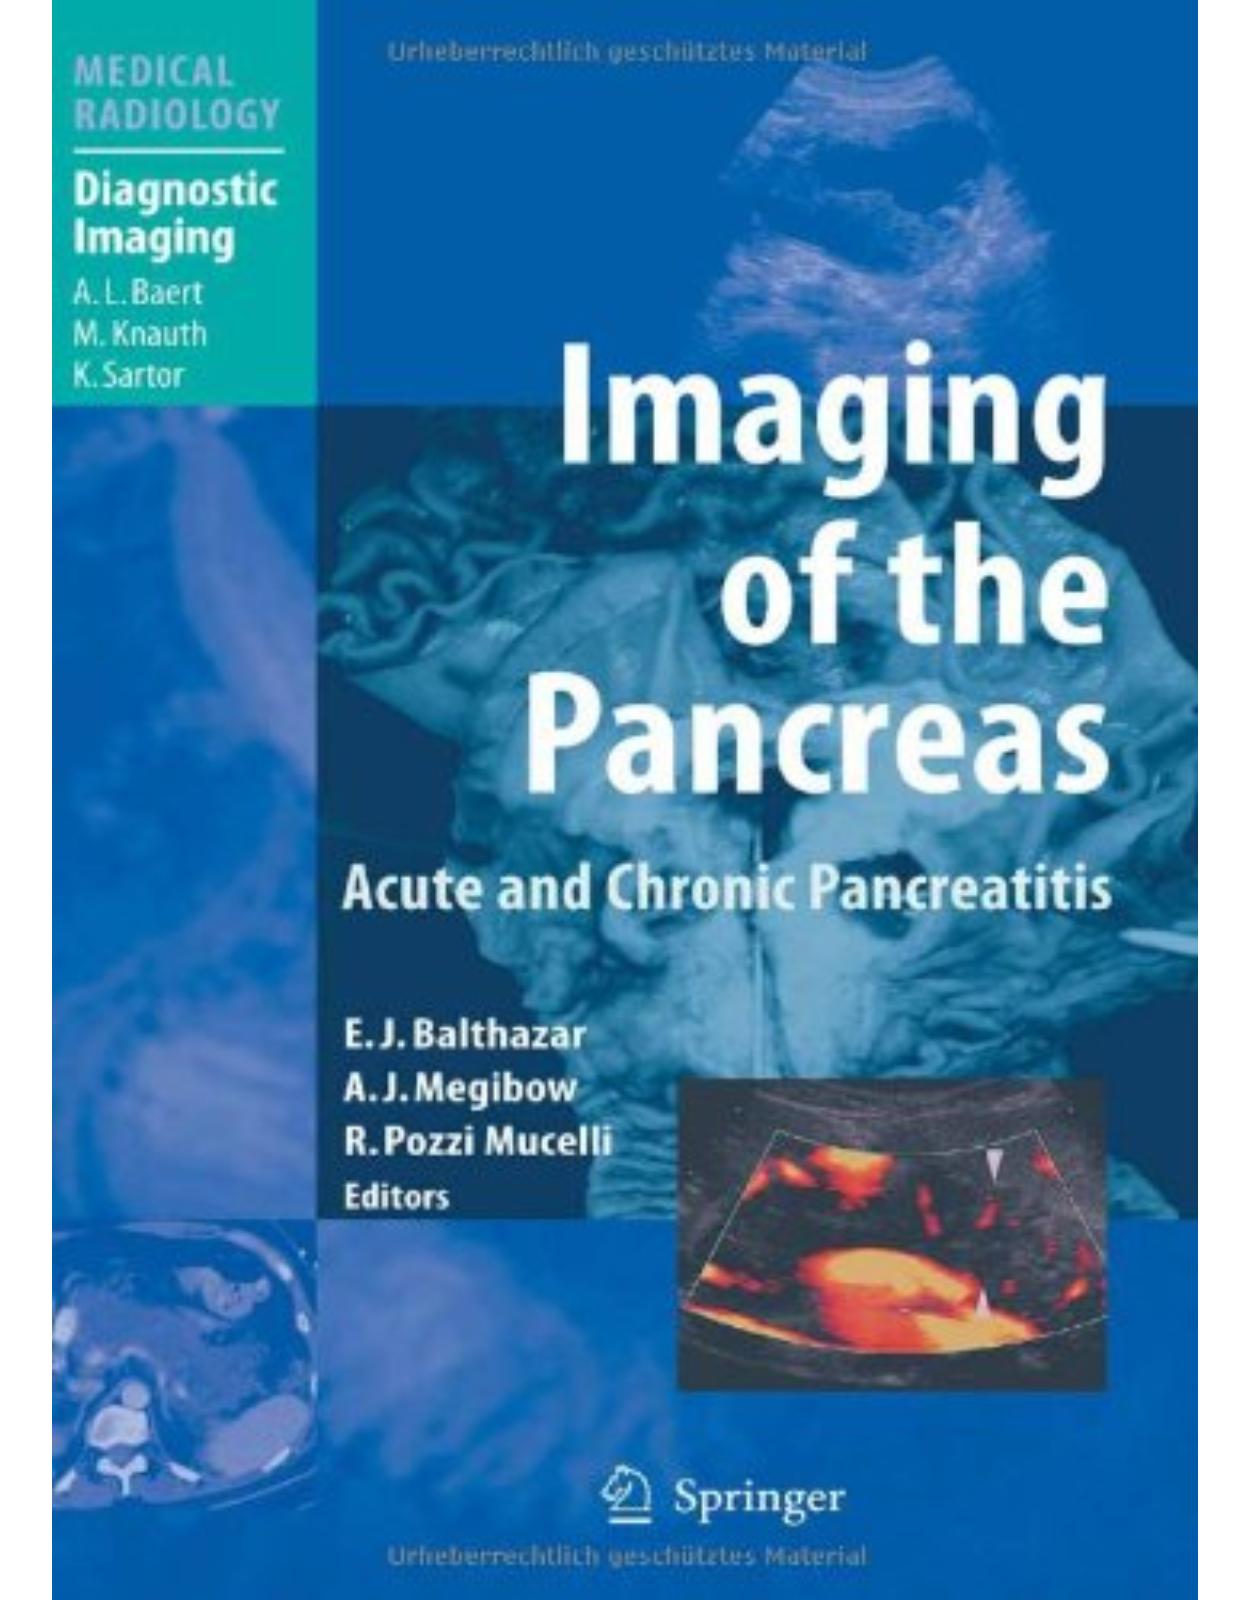 Imaging of the Pancreas: Acute and Chronic Pancreatitis (Medical Radiology / Diagnostic Imaging) 